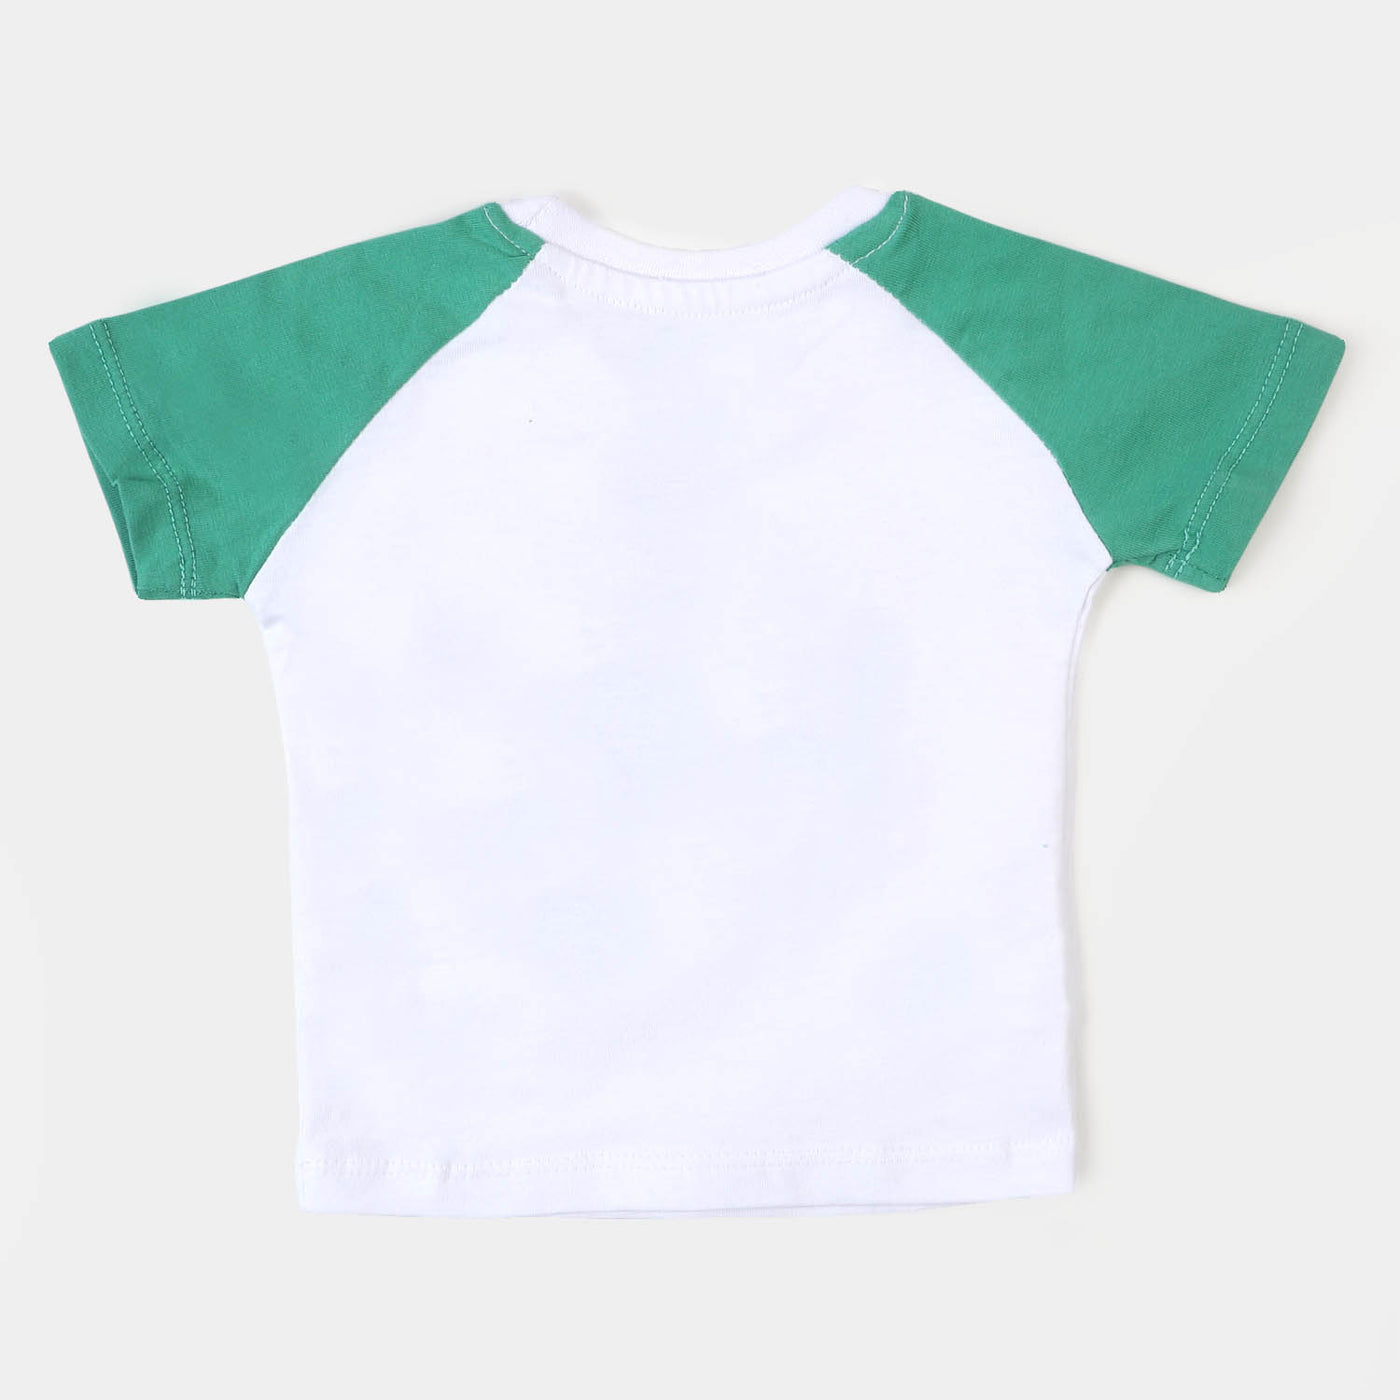 Infant Boys Round Neck T-Shirt Laugh-Whit/Green